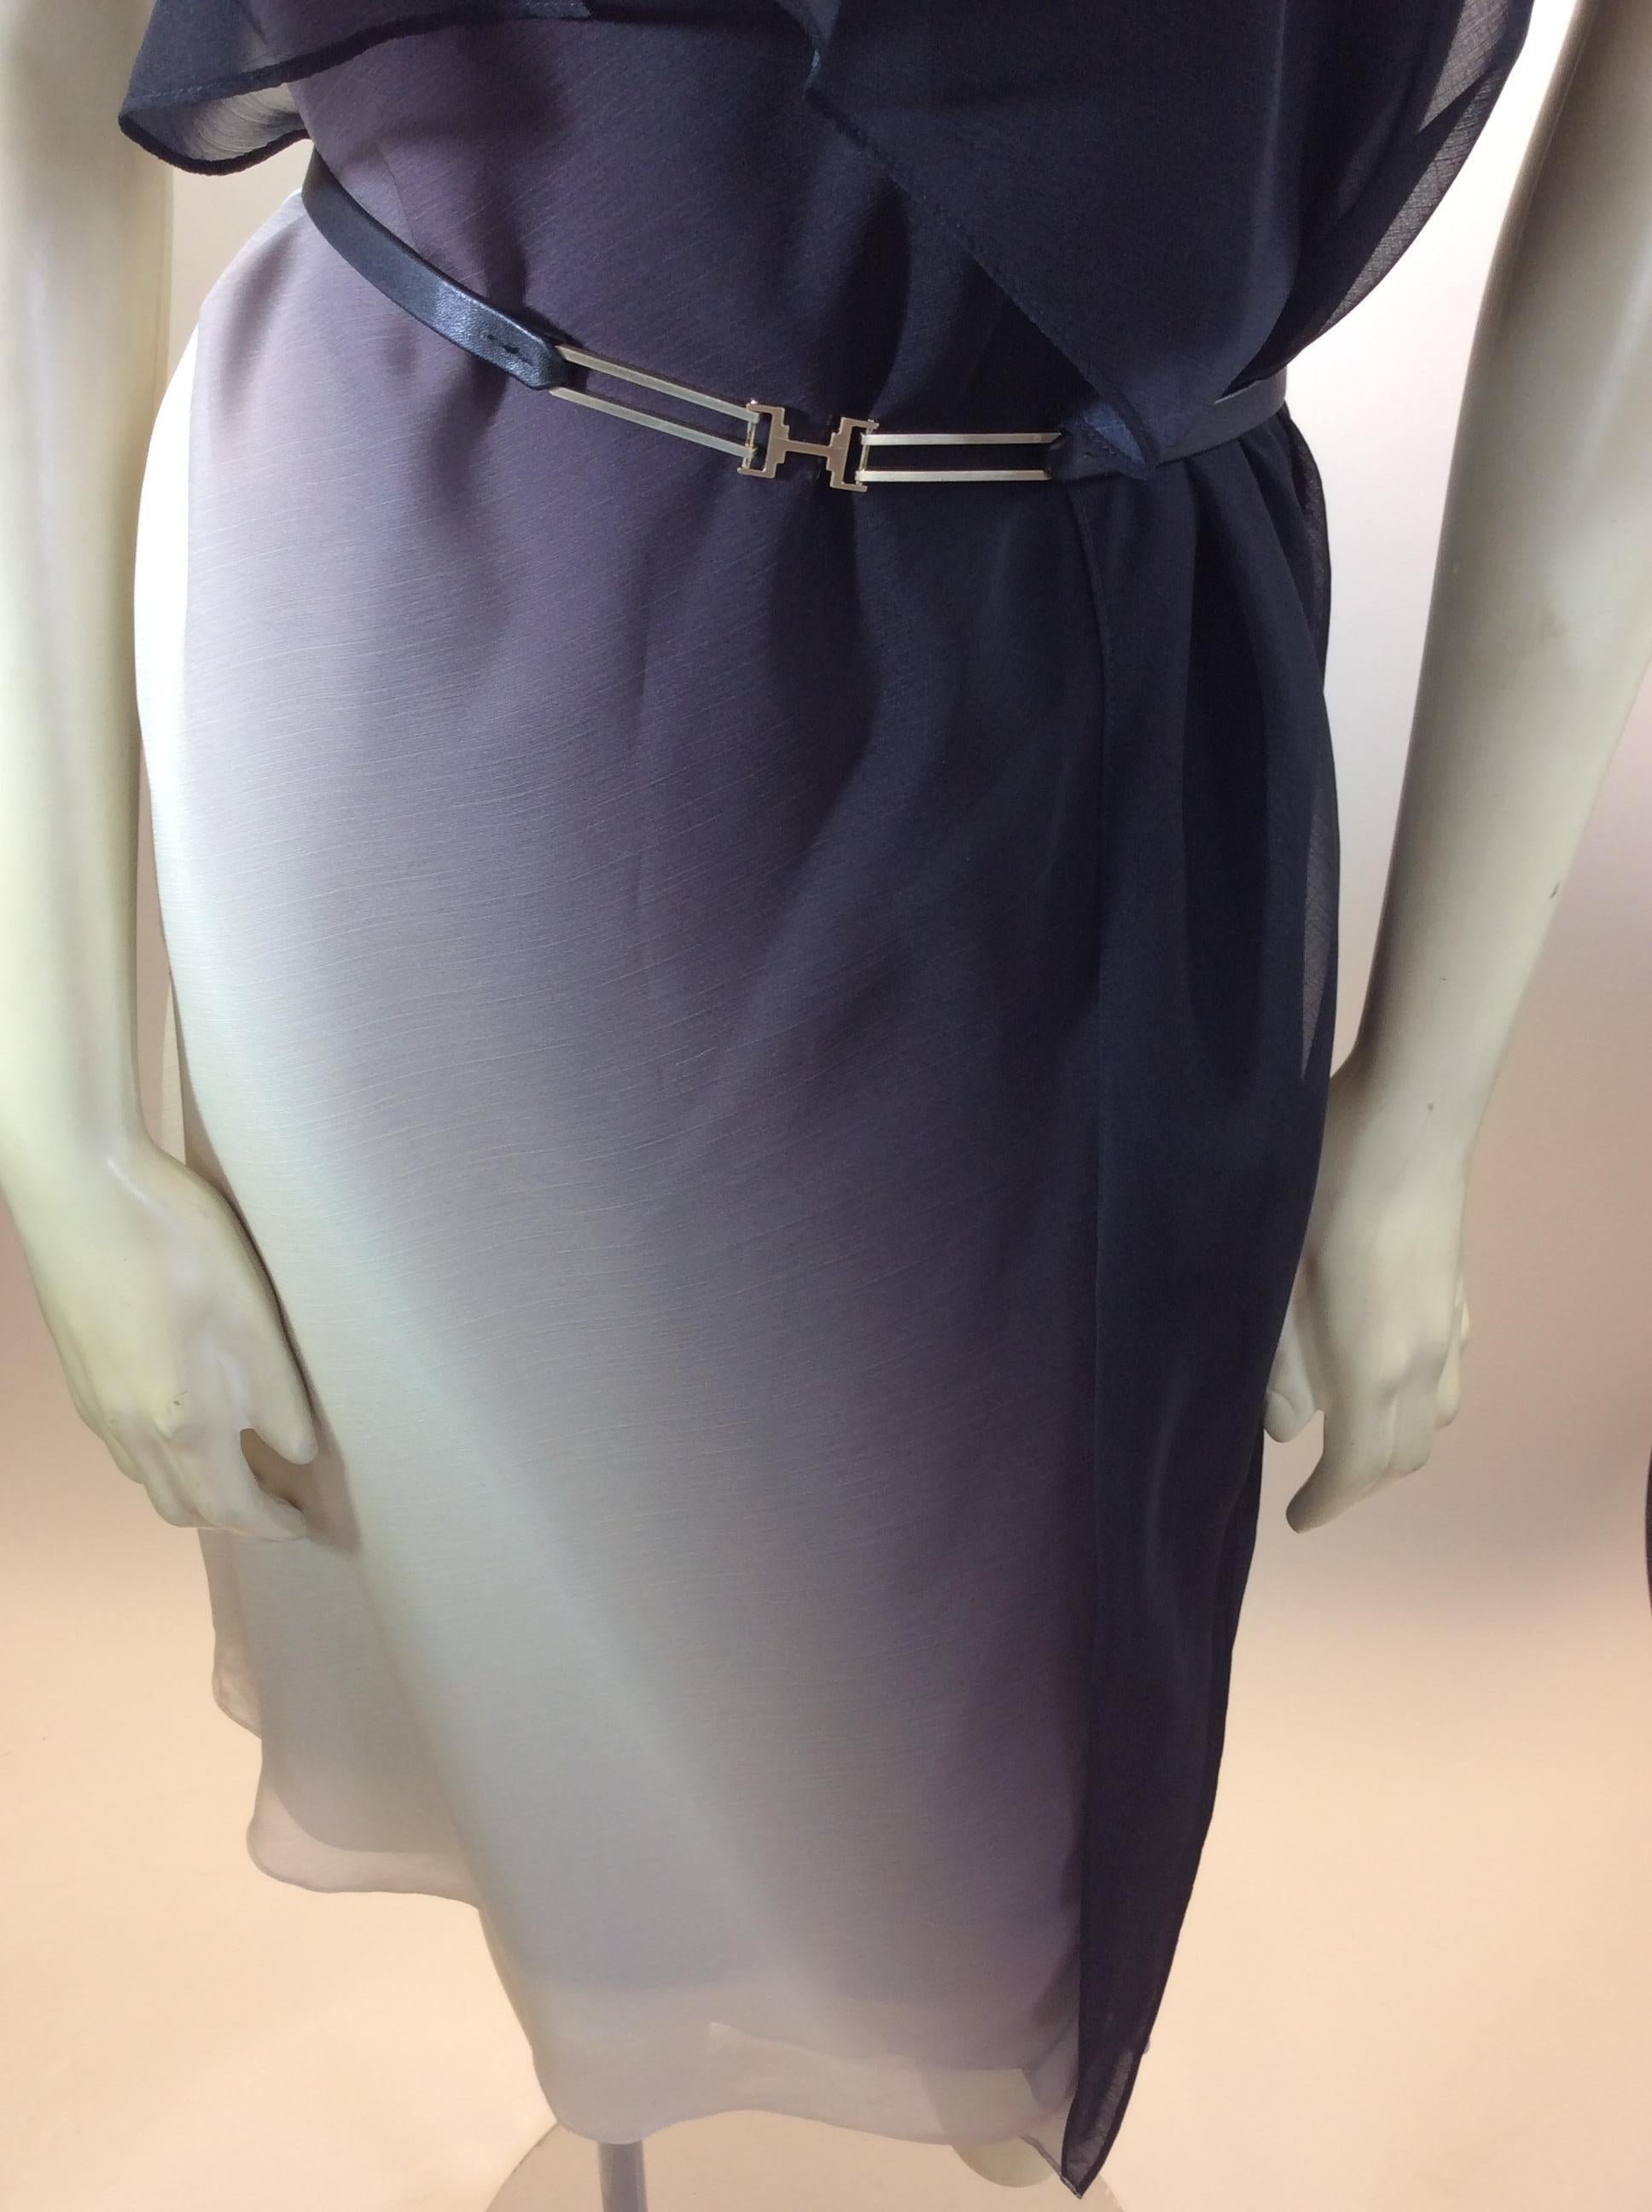 Halston Heritage Black and White Ombre Belted Dress In Good Condition For Sale In Narberth, PA